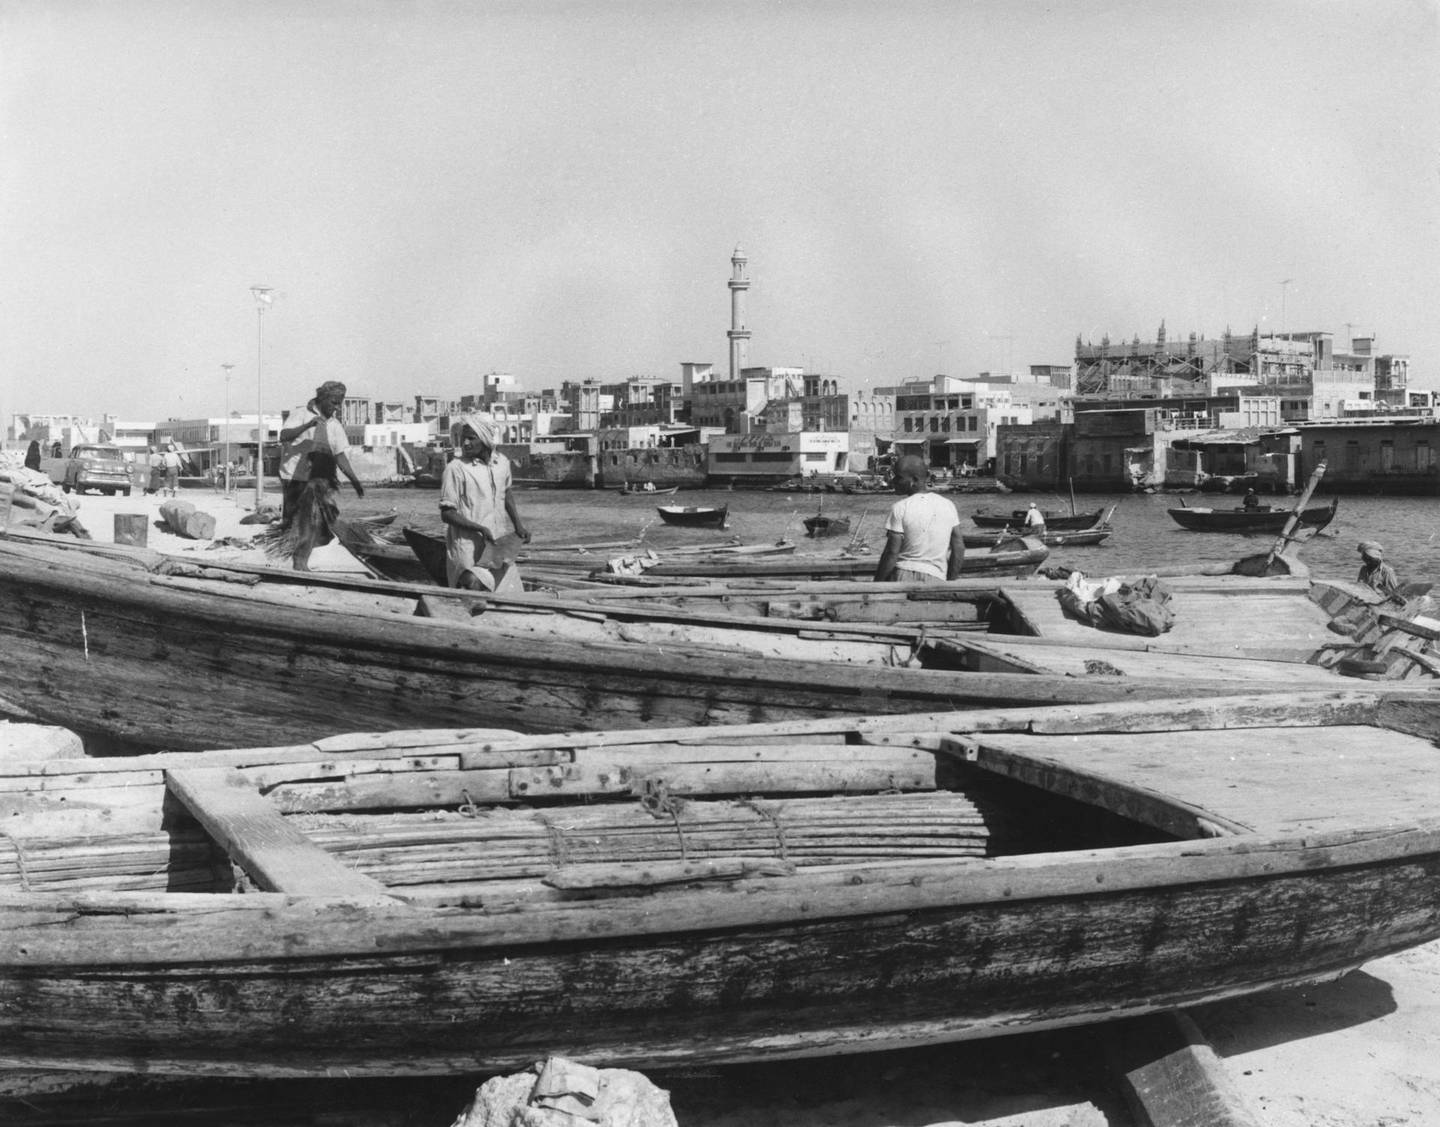 Boats on the Creek in Dubai, with the Customs House in the background, 1967. (Photo by Chris Ware/Keystone Features/Hulton Archive/Getty Images)